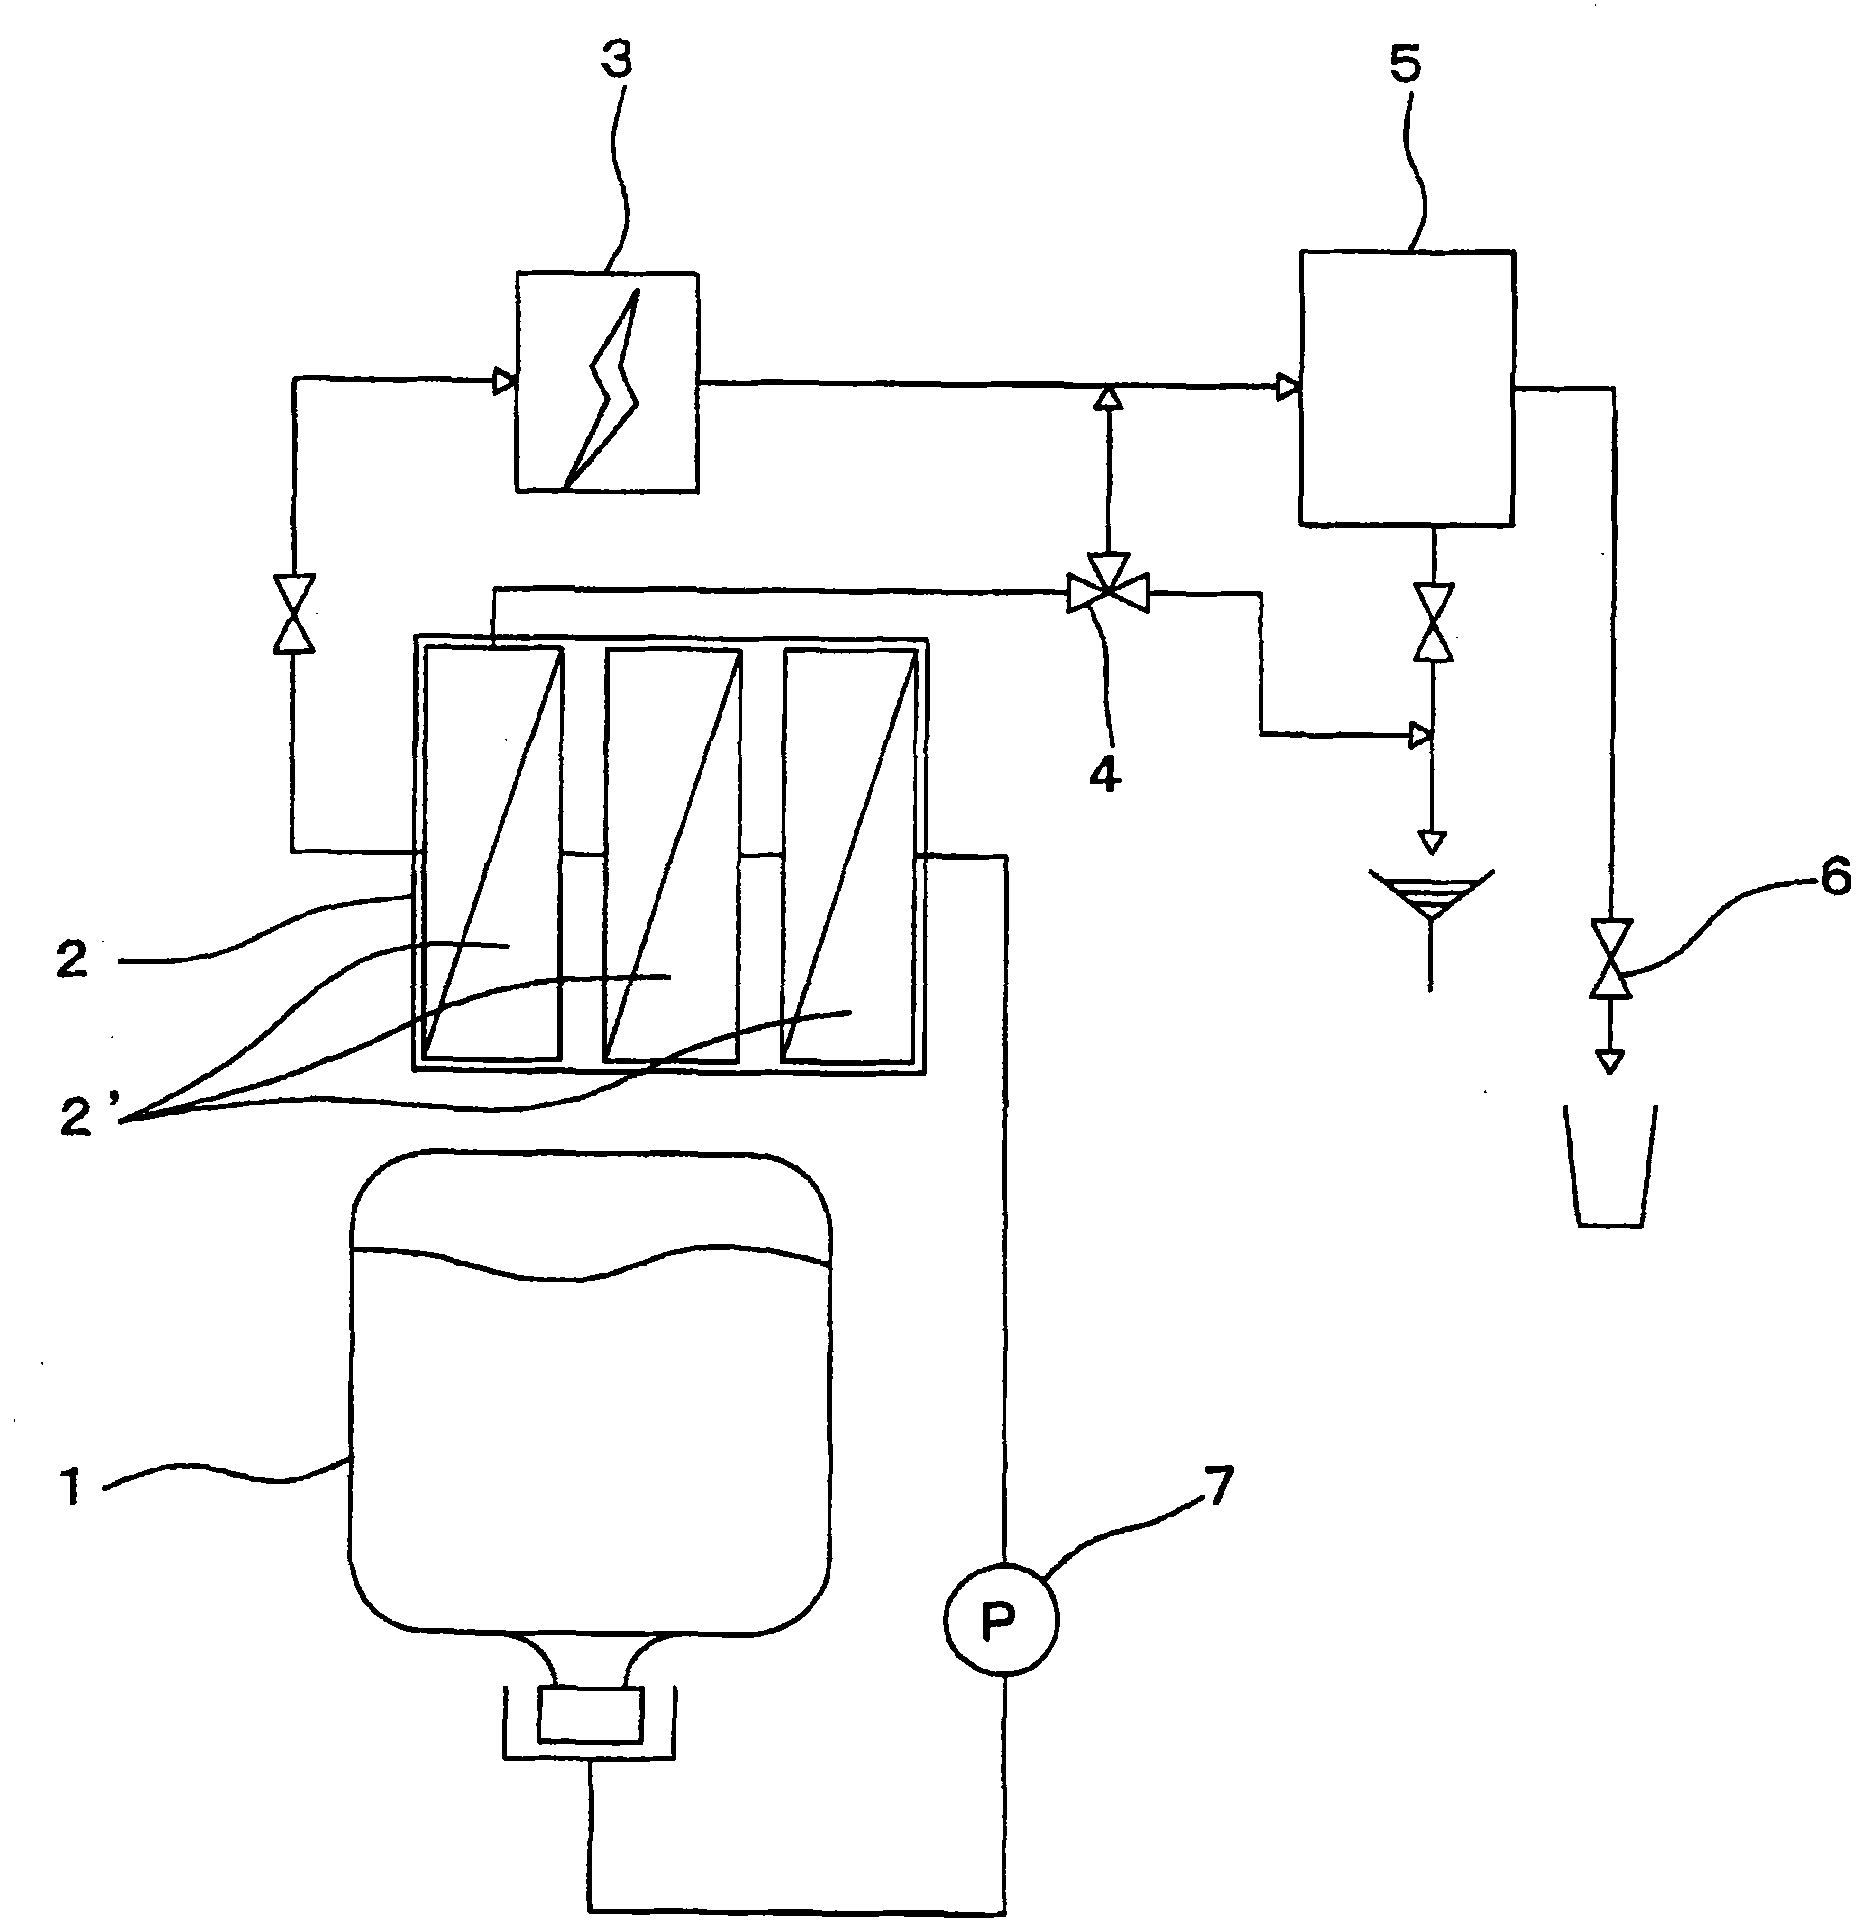 Drinking electrolytic water apparatus using bottled water as unpurified water